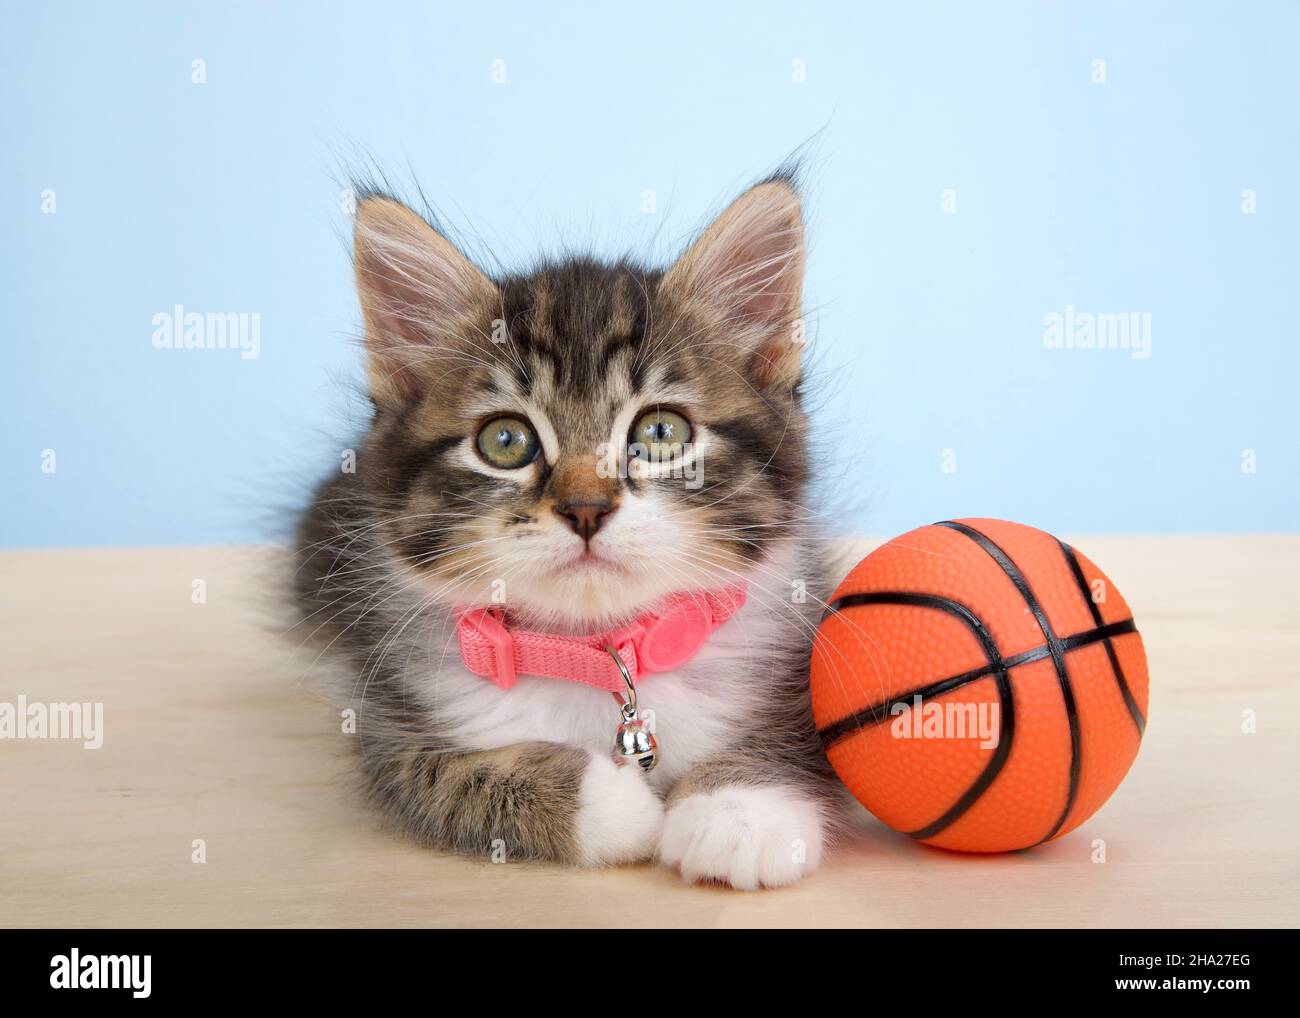 Adorable grey and white polydactyl kitten wearing a pink collar laying on a wood floor next to tiny sized basketball, on blue background. Animal antic Stock Photo